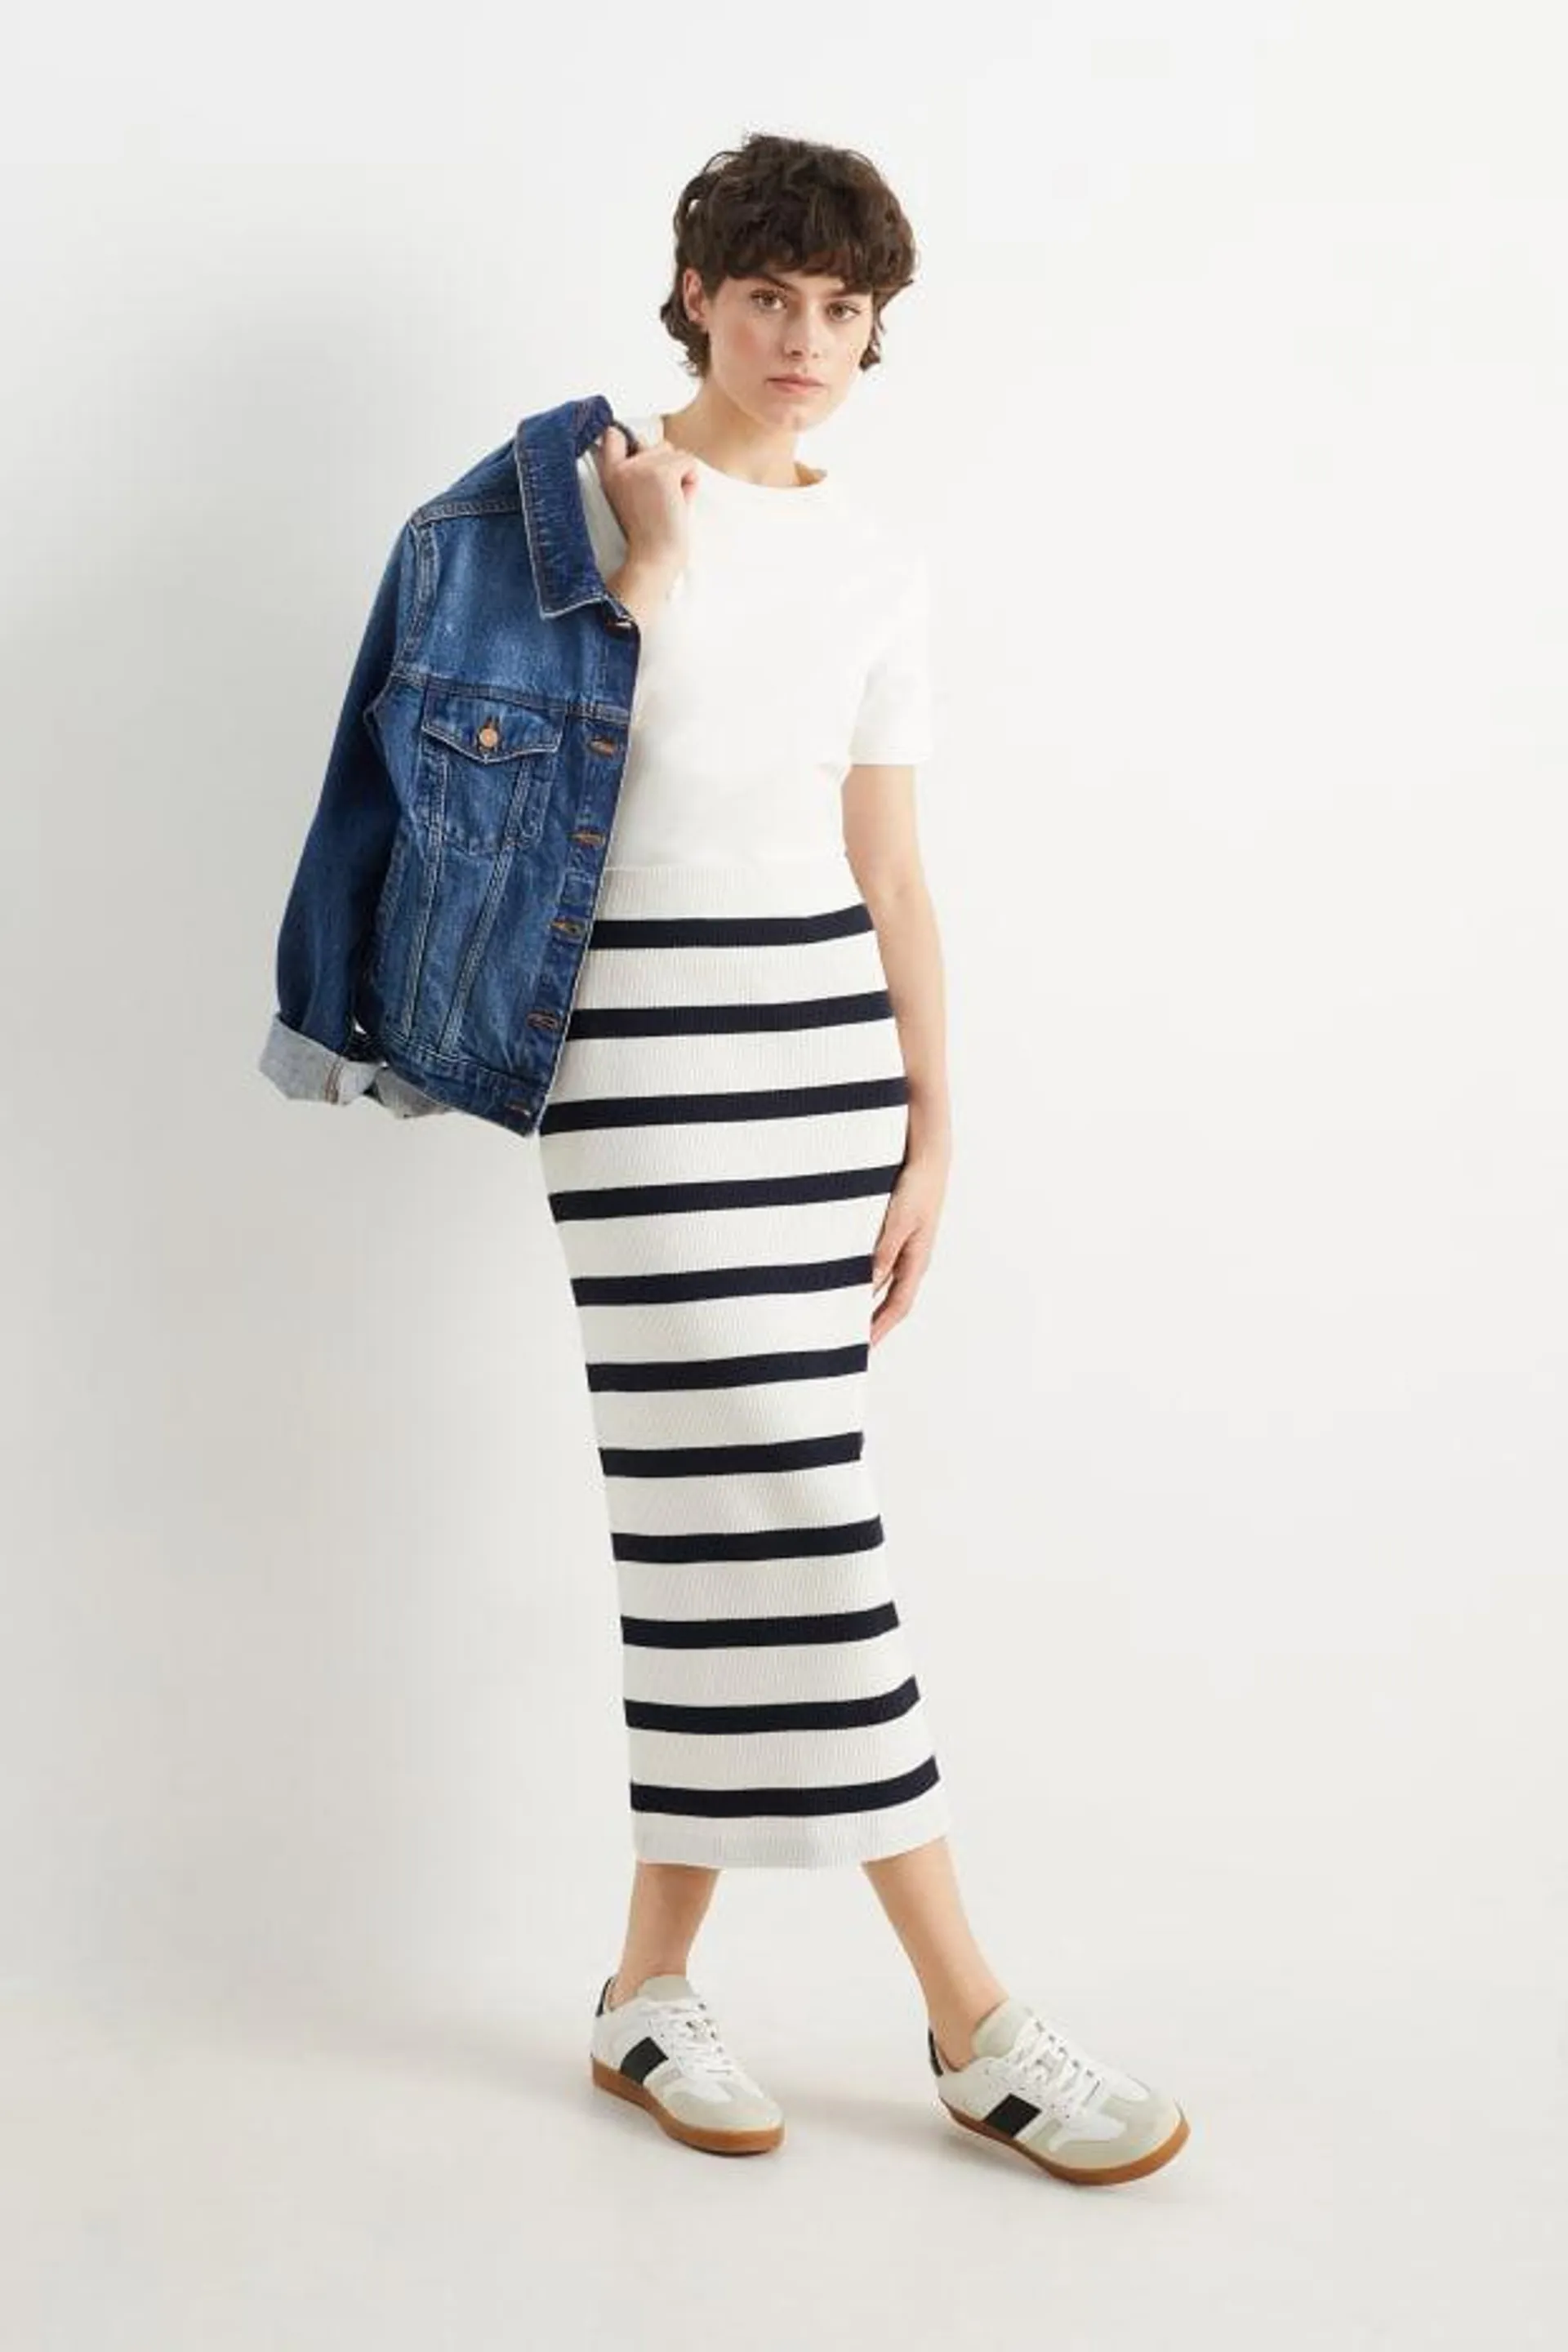 Knitted skirt - striped